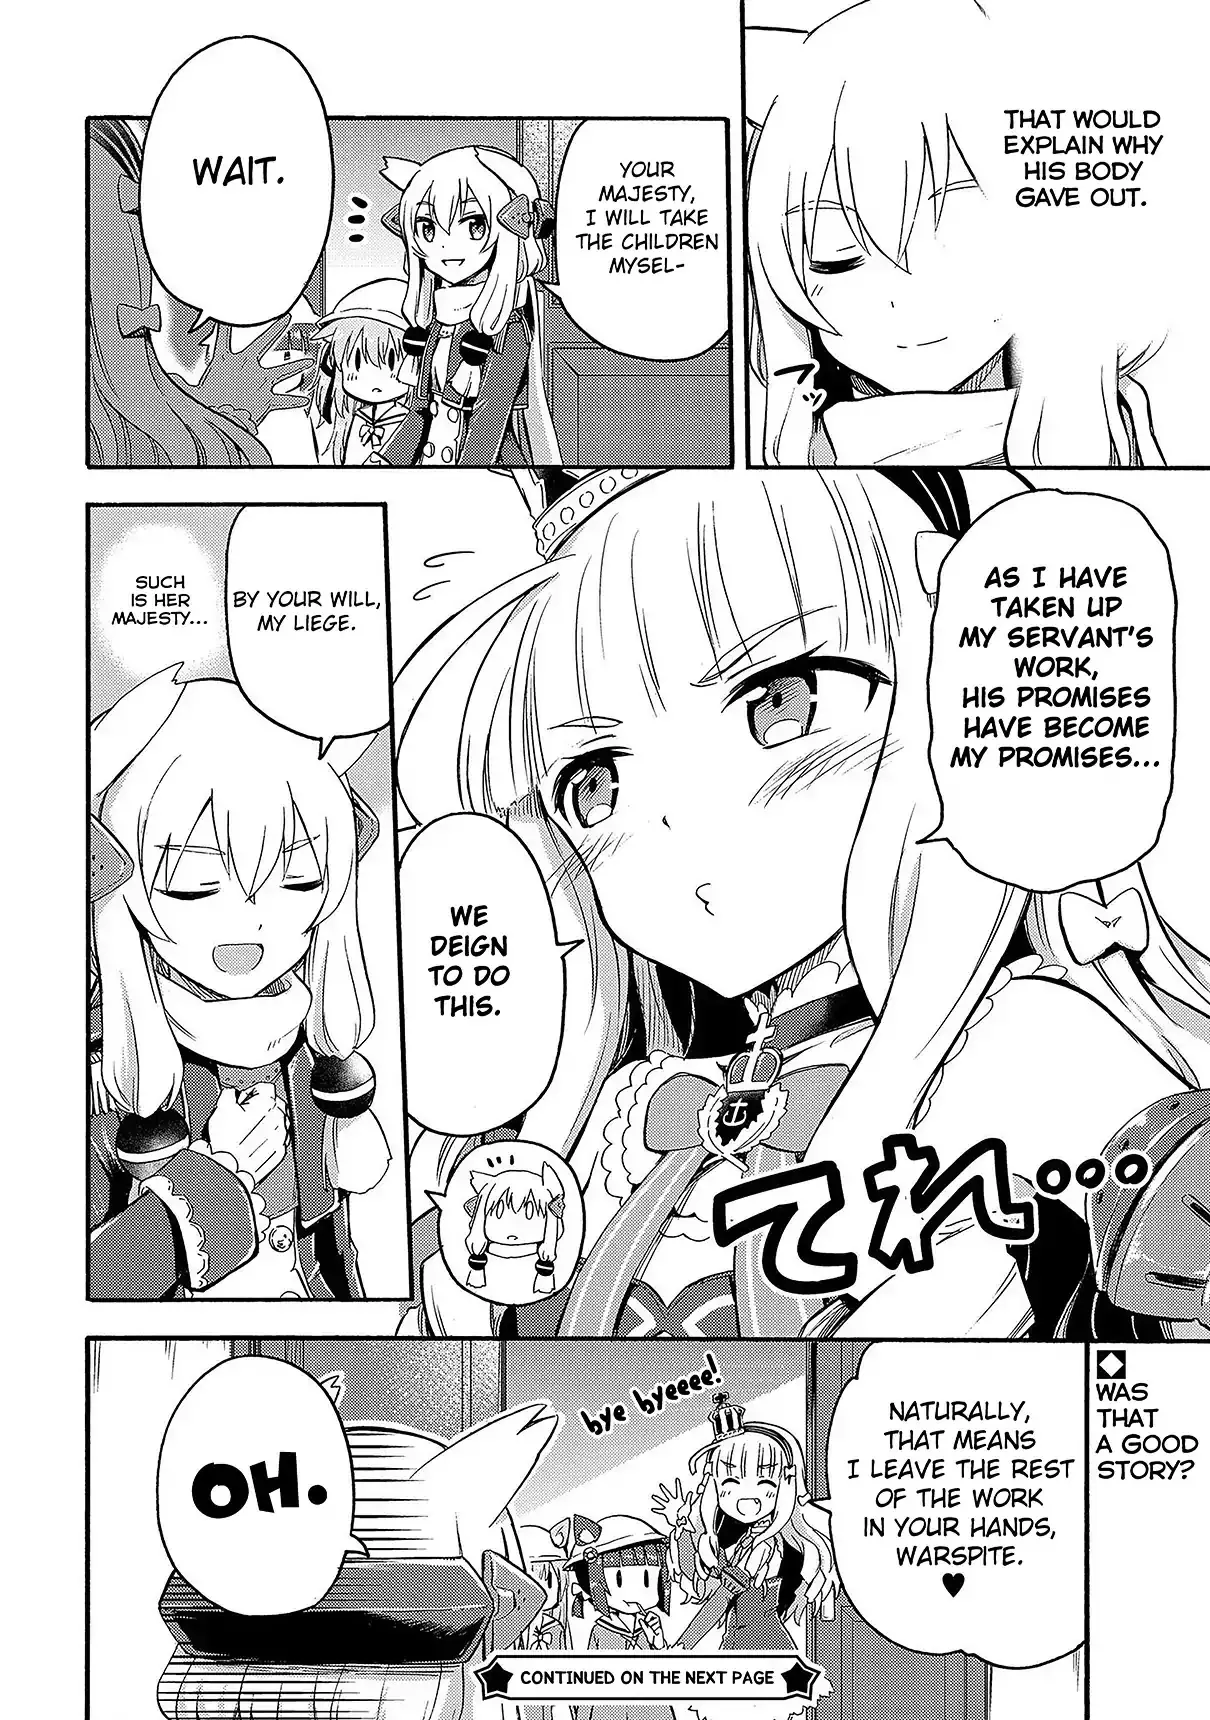 Azur Lane: Queen's Orders - 3 page 4-1c5f9cc3